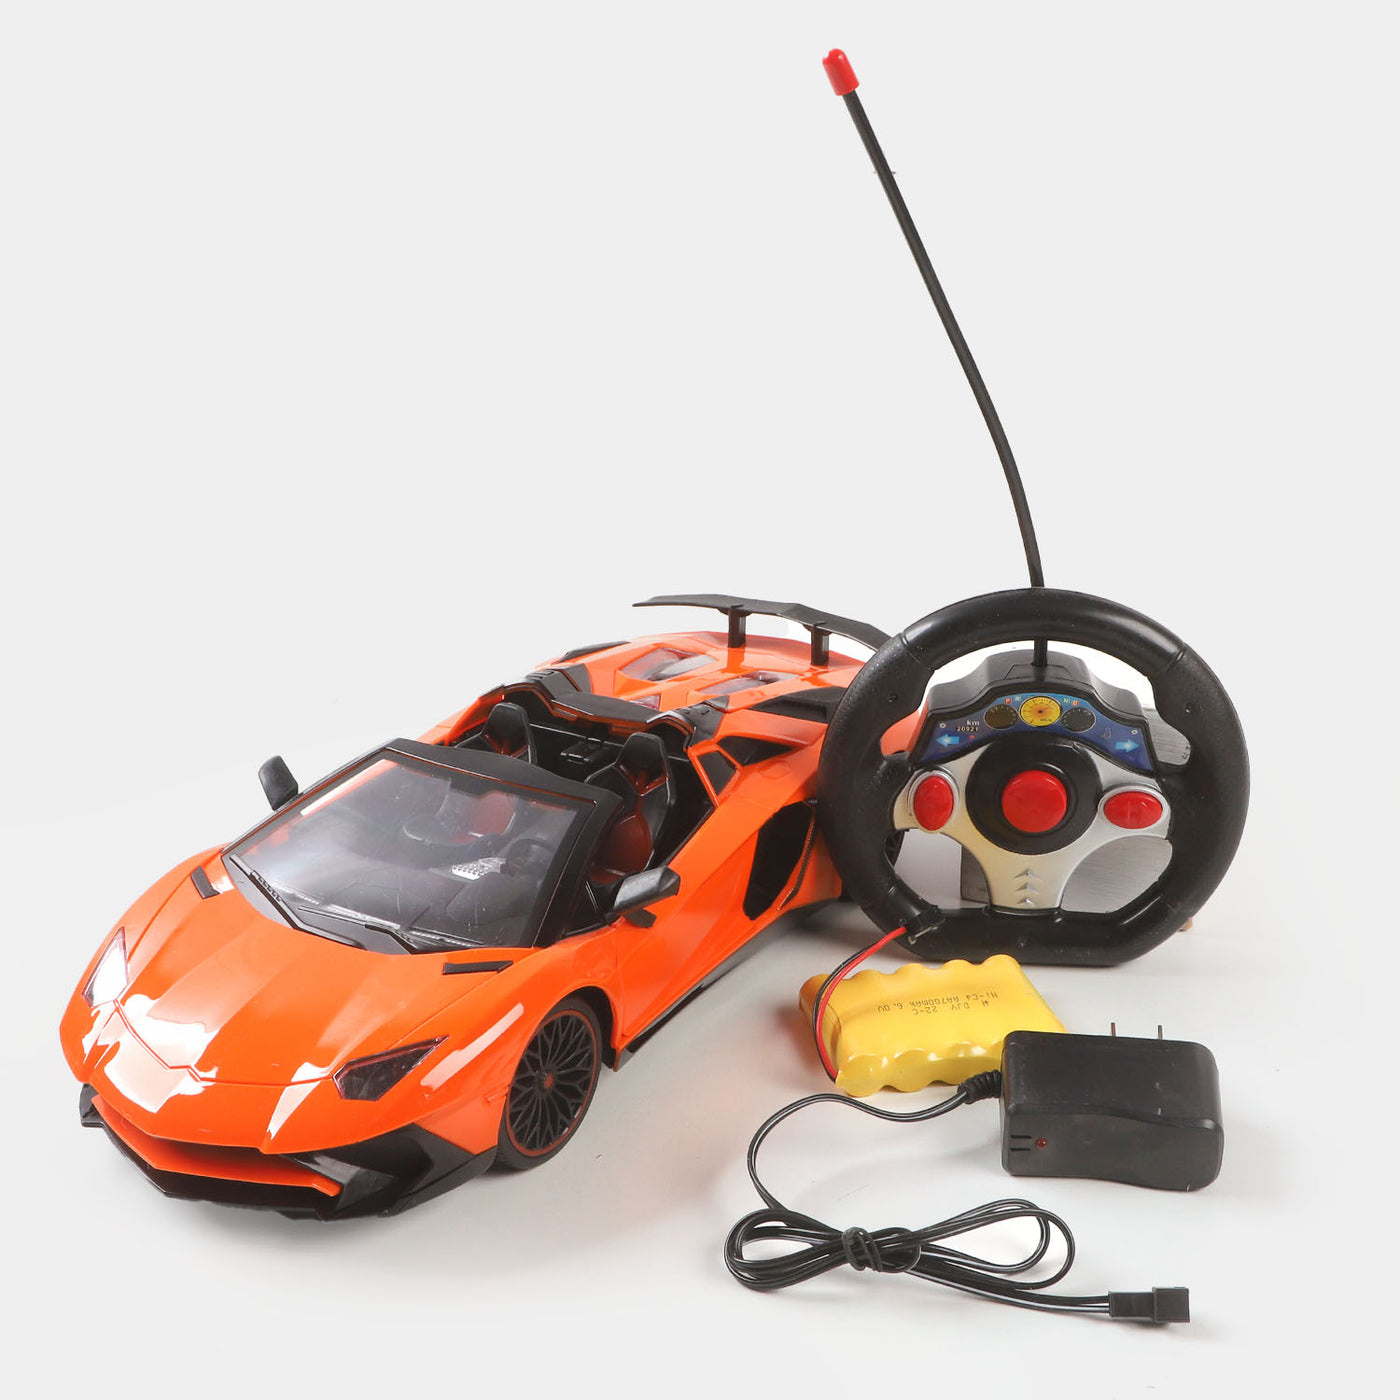 Super Sports Remote Control Car Toy For Kids